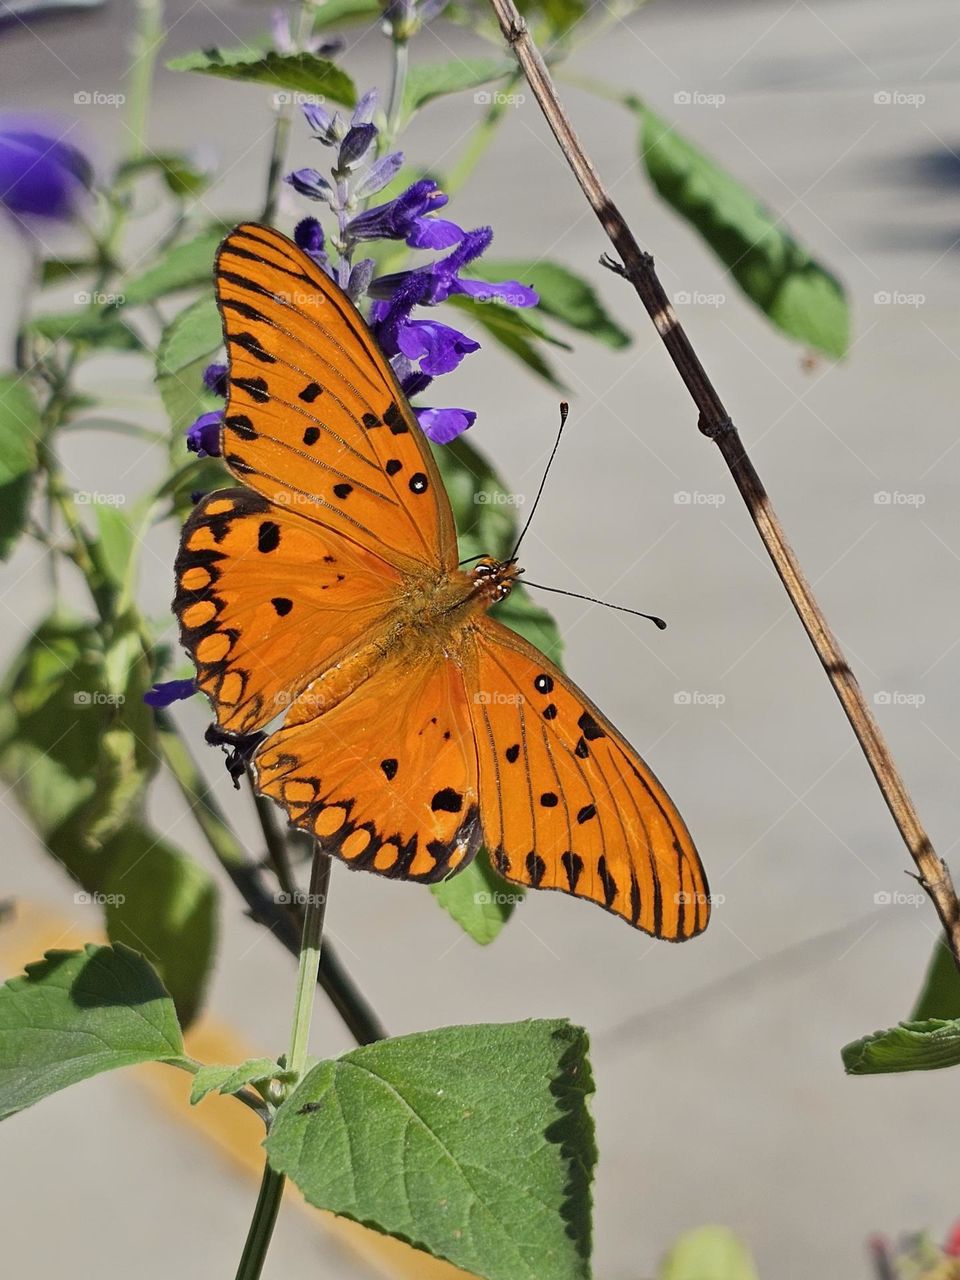 Passion Butterfly or Gulf fritillary (Agraulis vanillae) is so beautiful!! The best name obviously being Passion butterfly for its bright, shiny orange wings. This one is in Argentina and feeding on lovely purple Salvia officinalis.